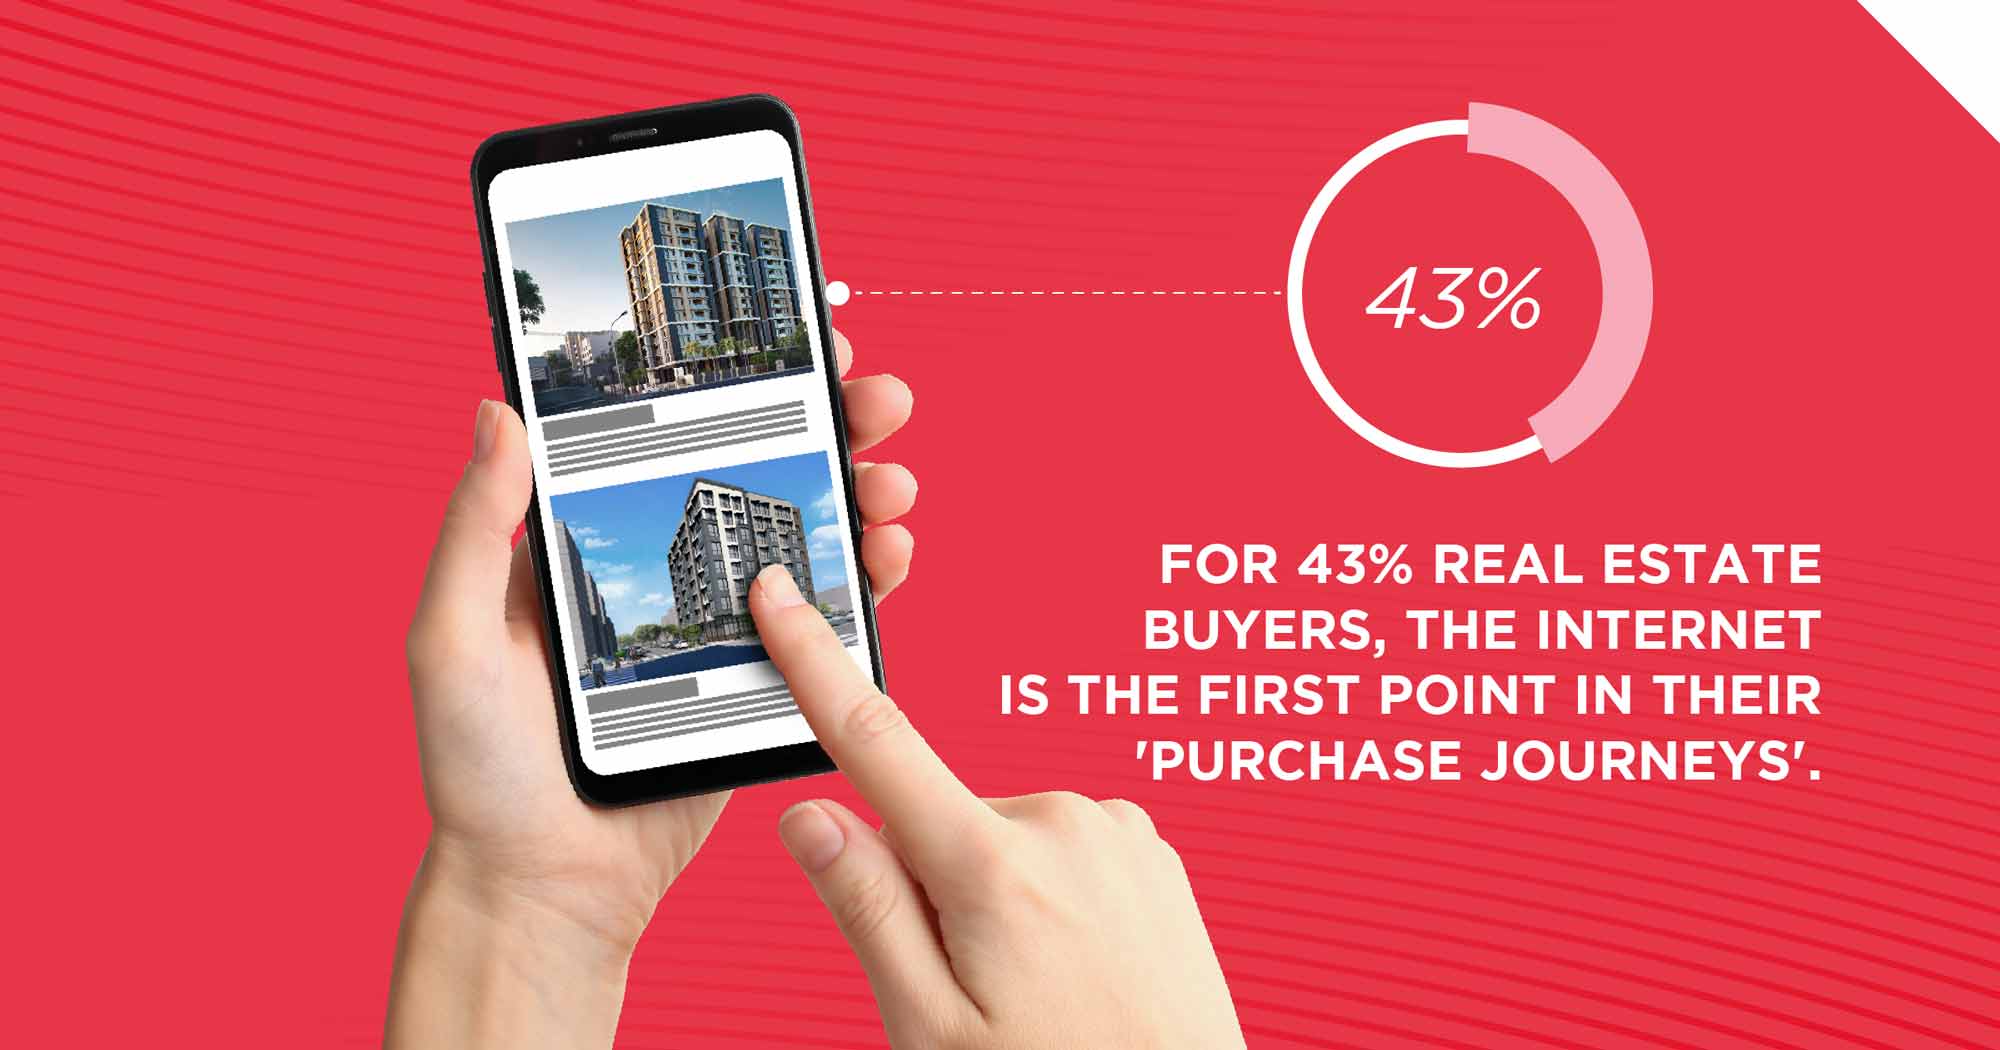 Real Estate Buyers & Purchase Journey